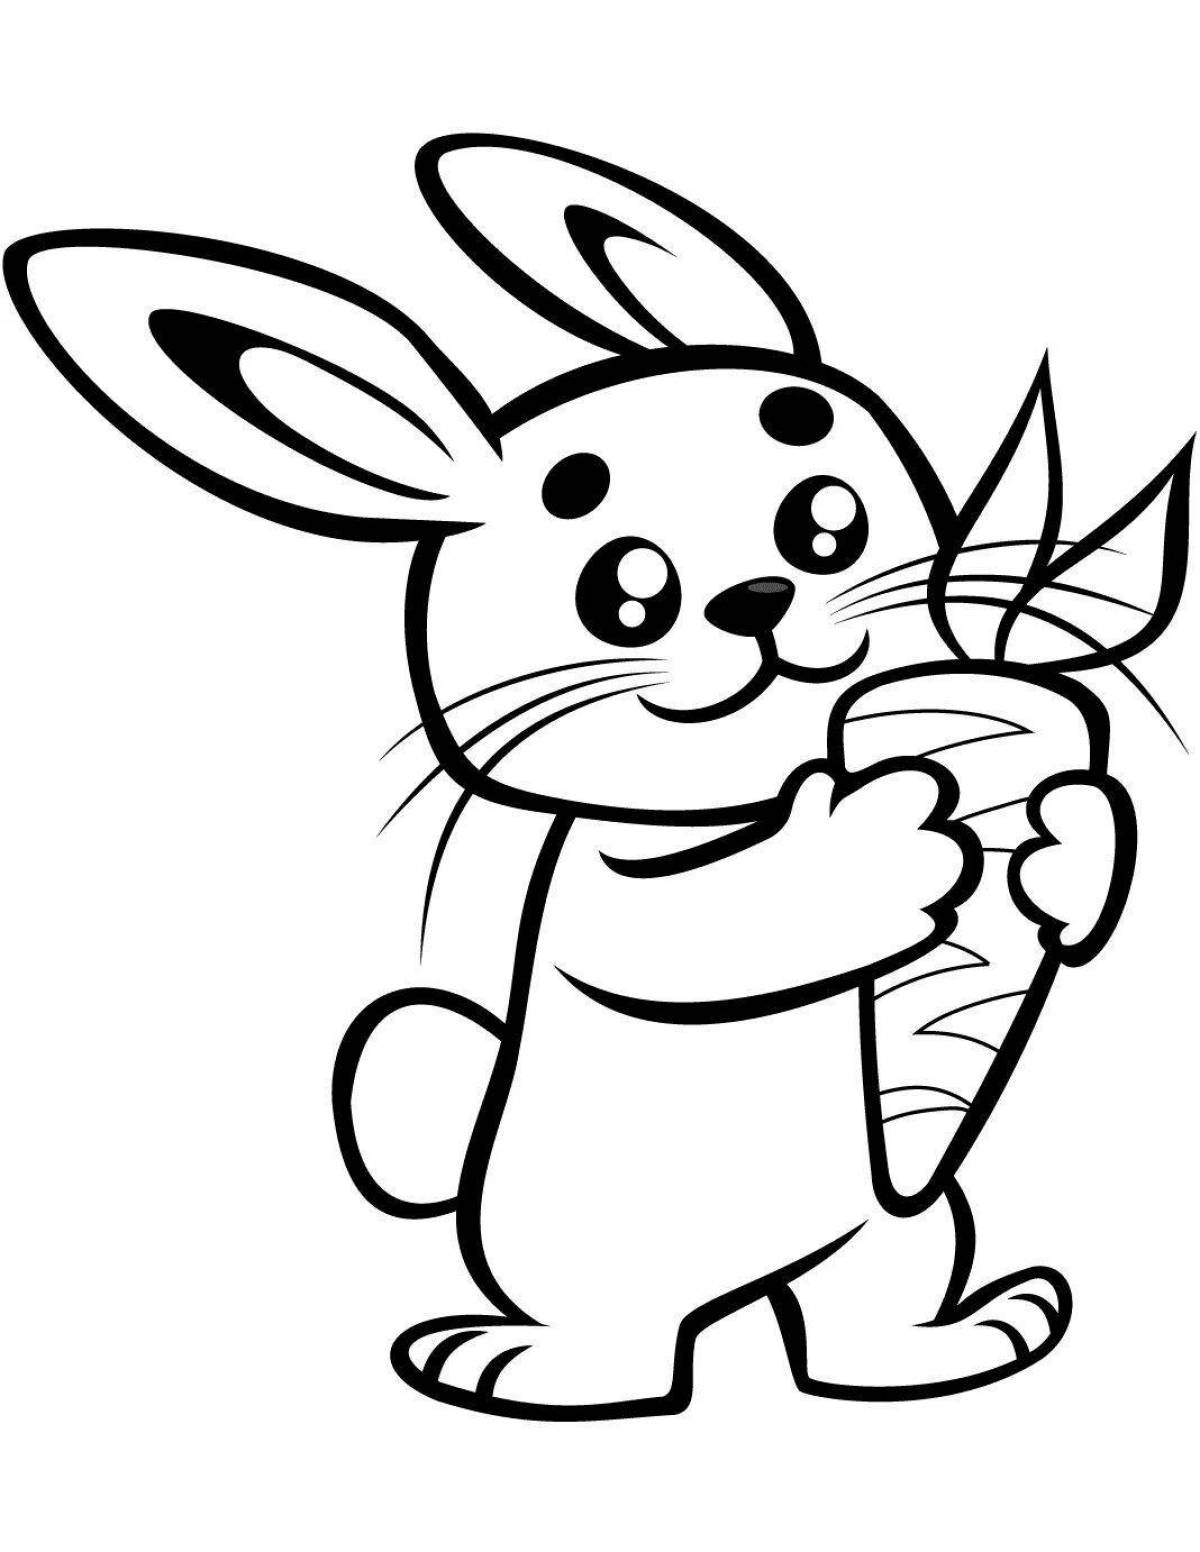 Colorful cat and rabbit coloring page